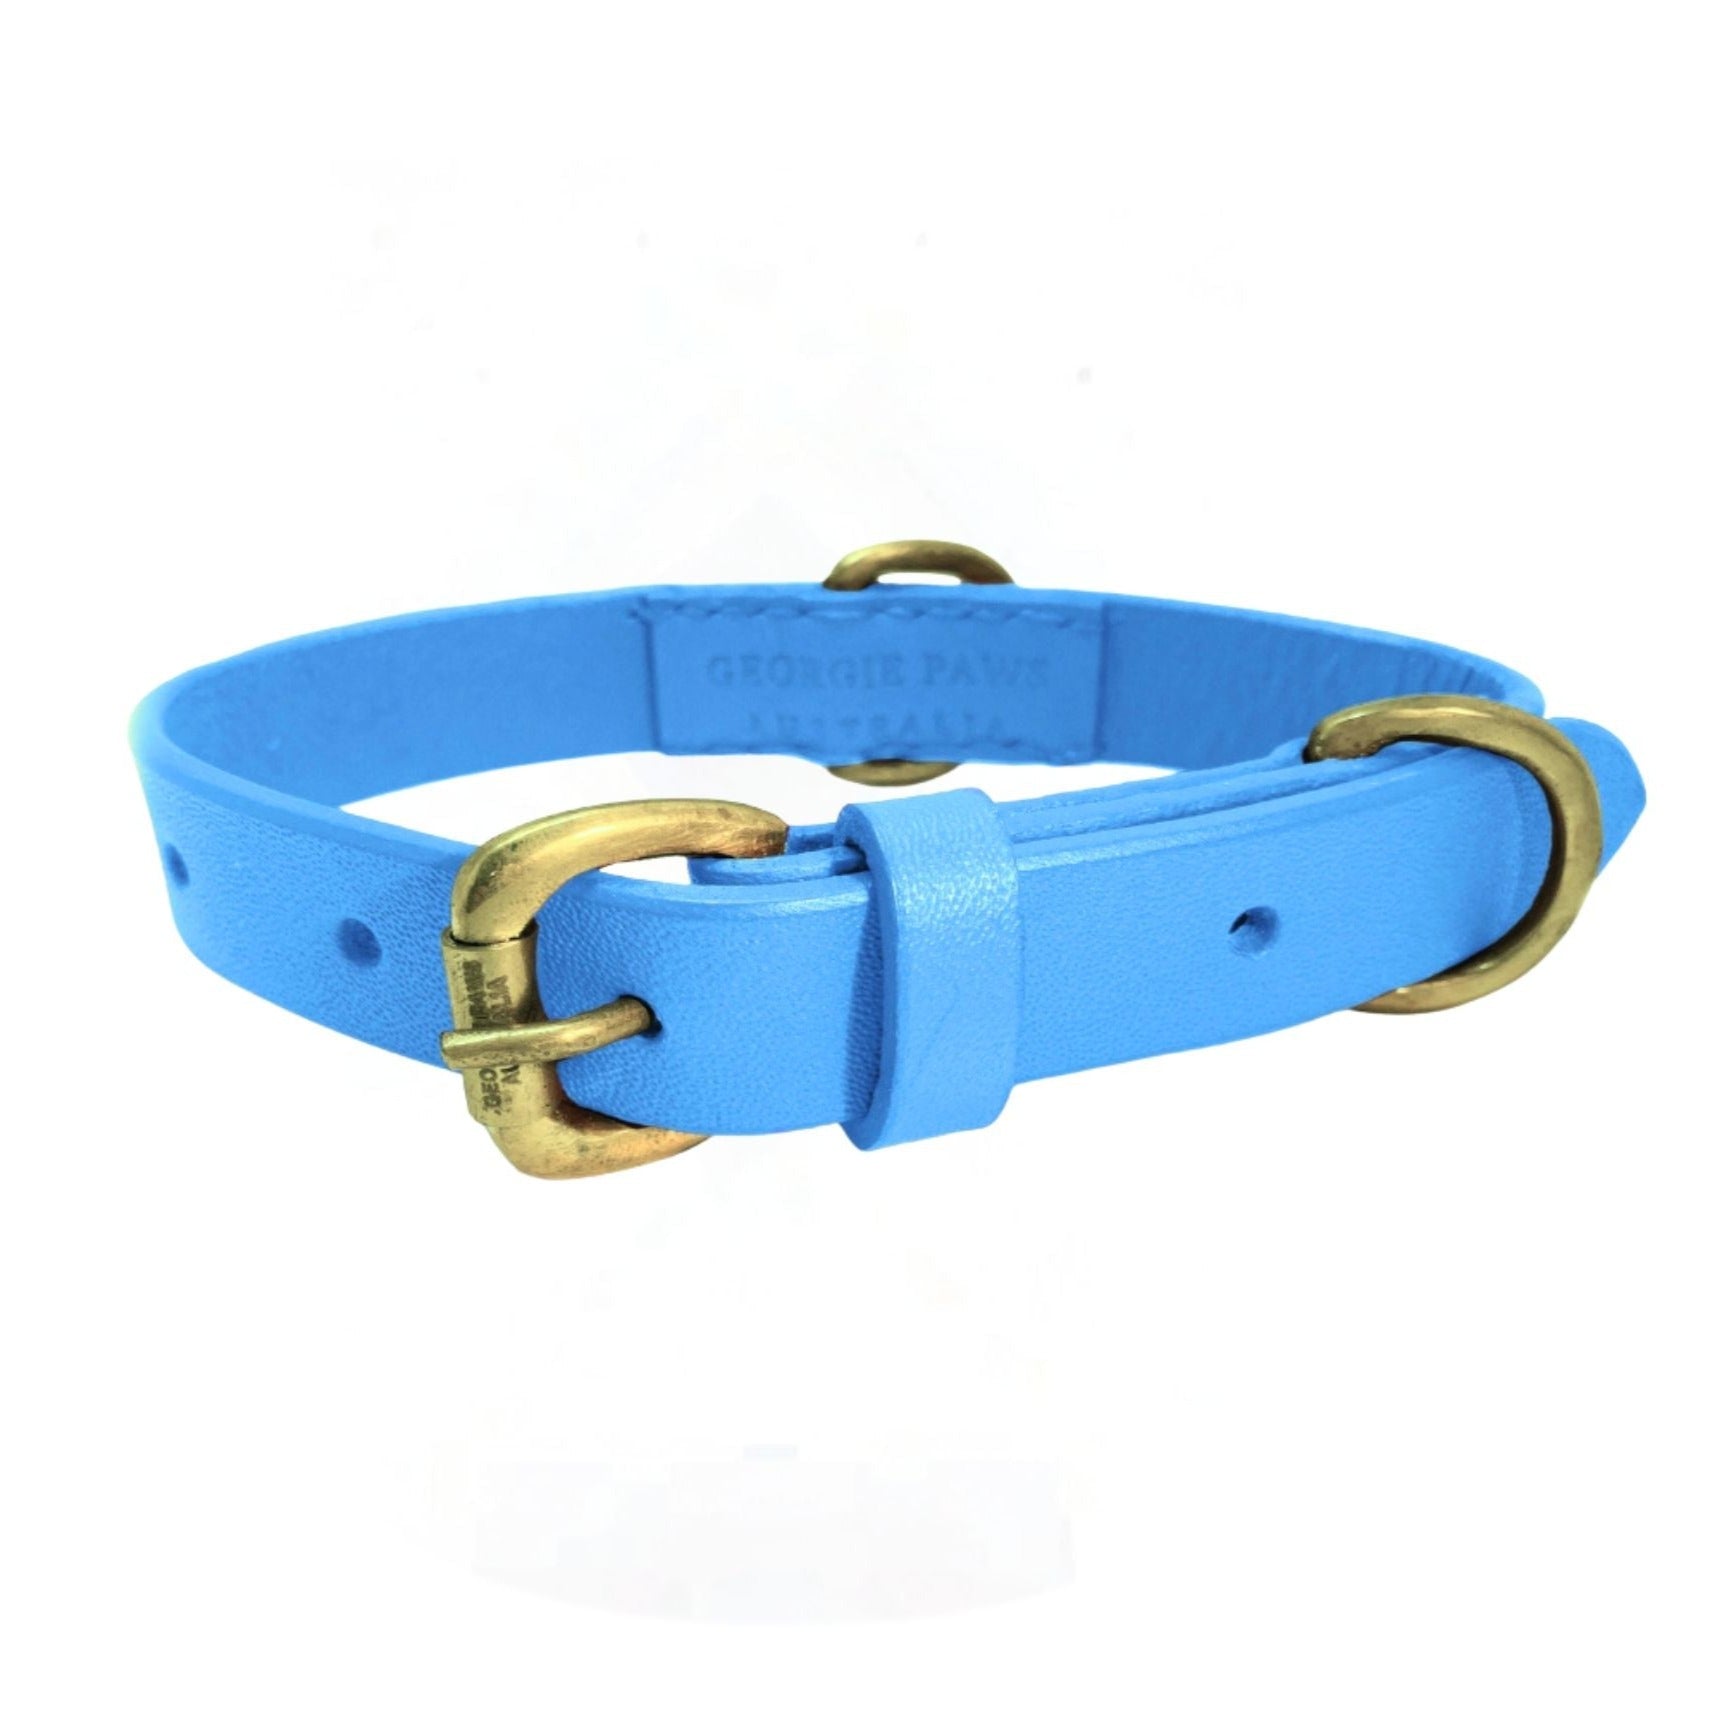 A vibrant Blue Georgie Paws leather dog collar with an antique brass hardware buckle and a loop, featuring an embossed Georgie Paws brand name, presented against a white background.